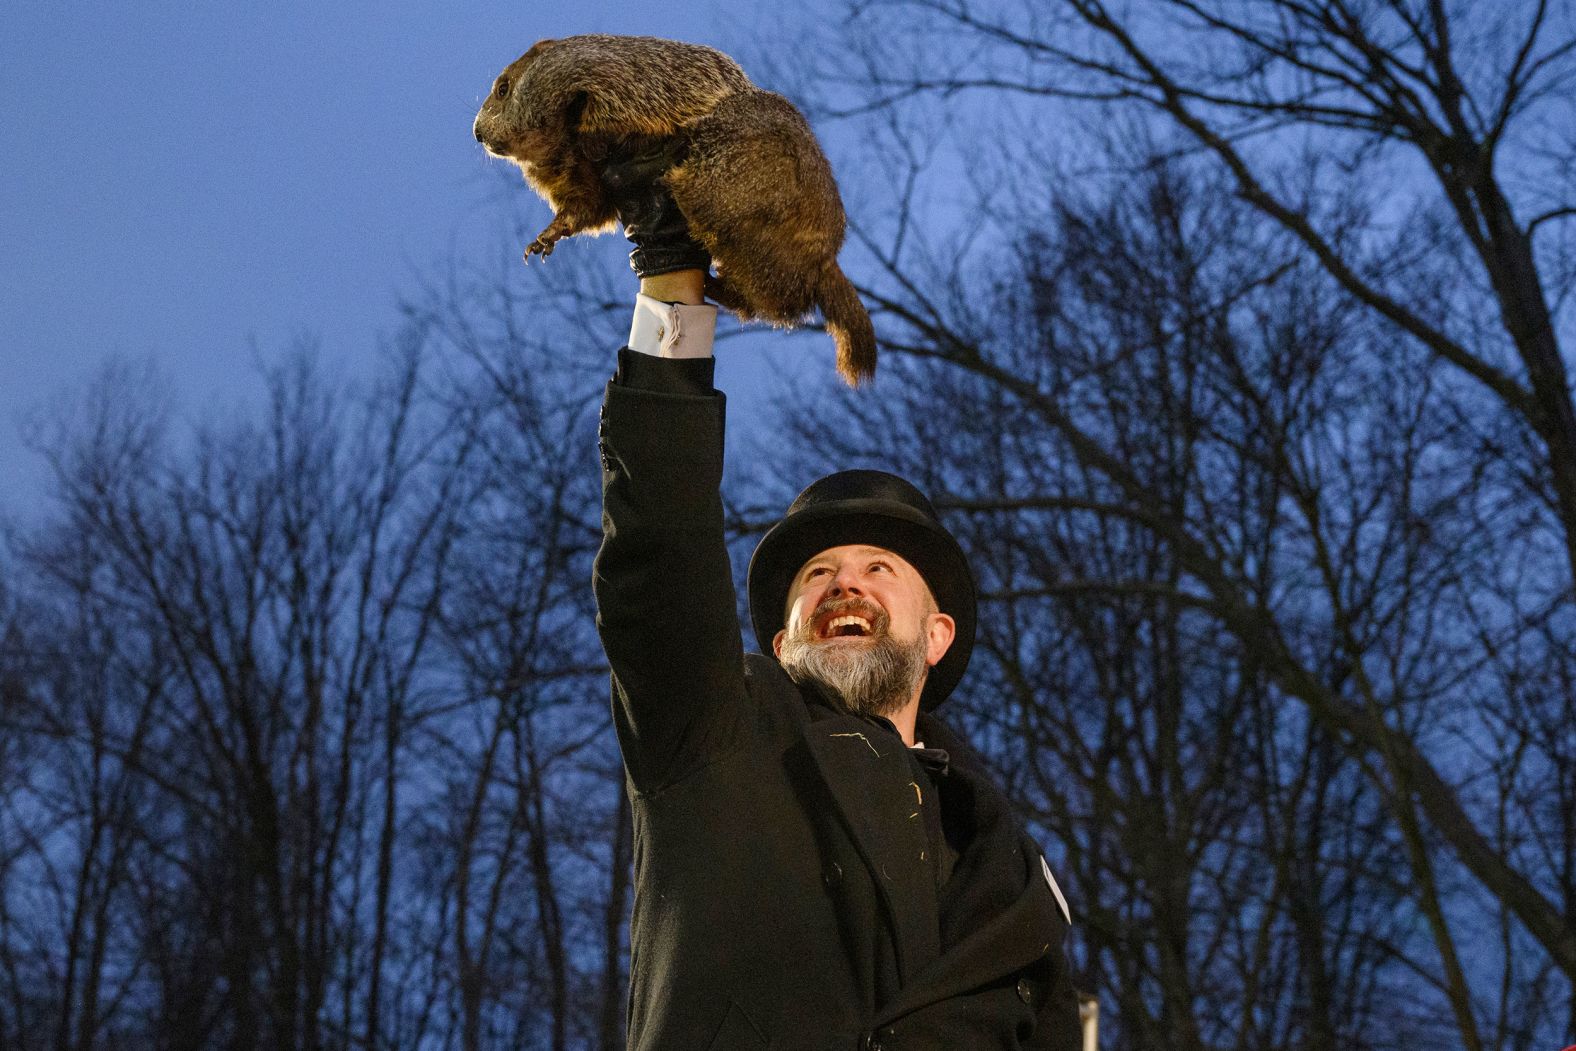 Groundhog handler AJ Dereume holds up Punxsutawney Phil after the famous groundhog <a href="index.php?page=&url=https%3A%2F%2Fwww.cnn.com%2F2024%2F02%2F02%2Fweather%2Fgroundhog-day-winter-spring-climate%2Findex.html">did not see his shadow</a> in Punxsutawney, Pennsylvania, on Friday, February 2. As legend has it, if Phil doesn’t see his shadow, an early spring arrives.